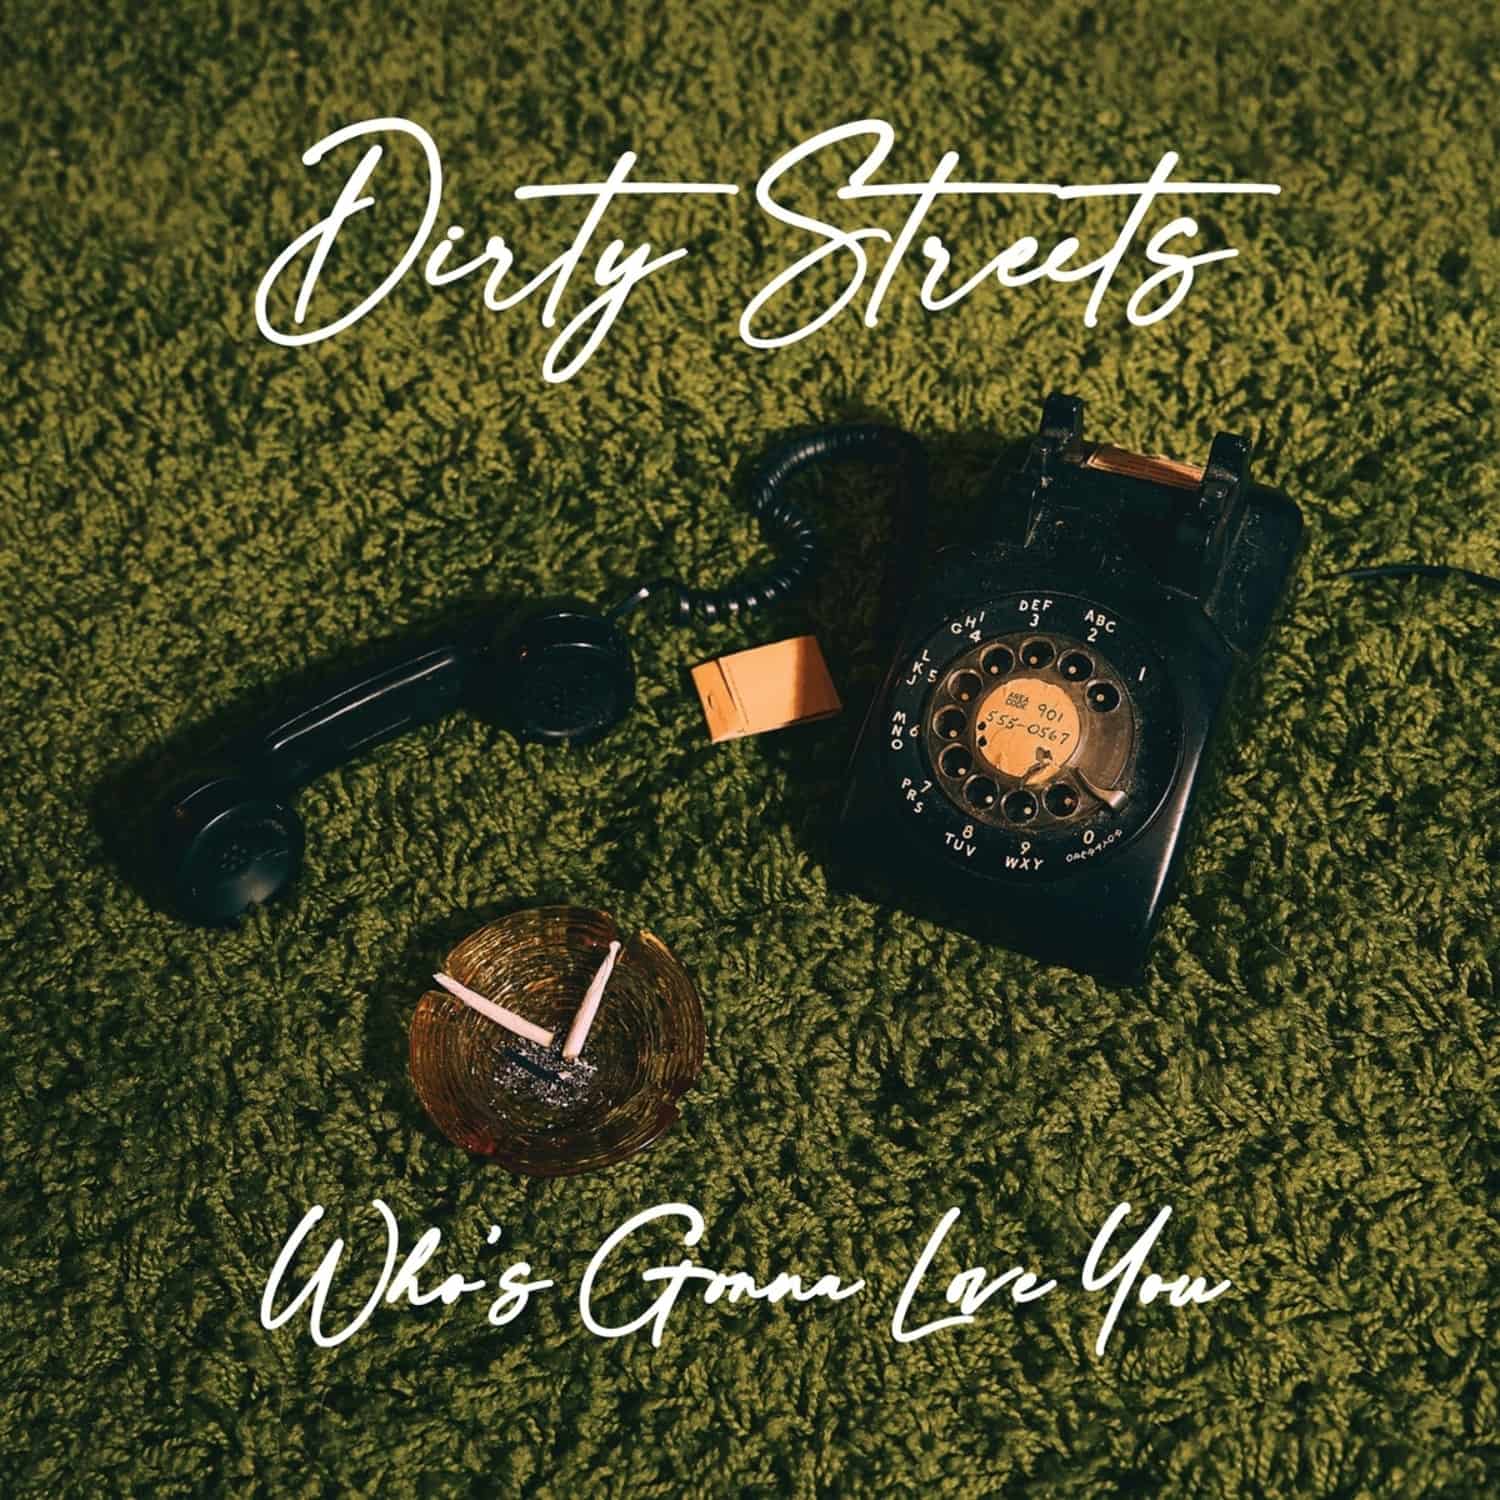 Dirty Streets - WHO S GONNA LOVE YOU? 